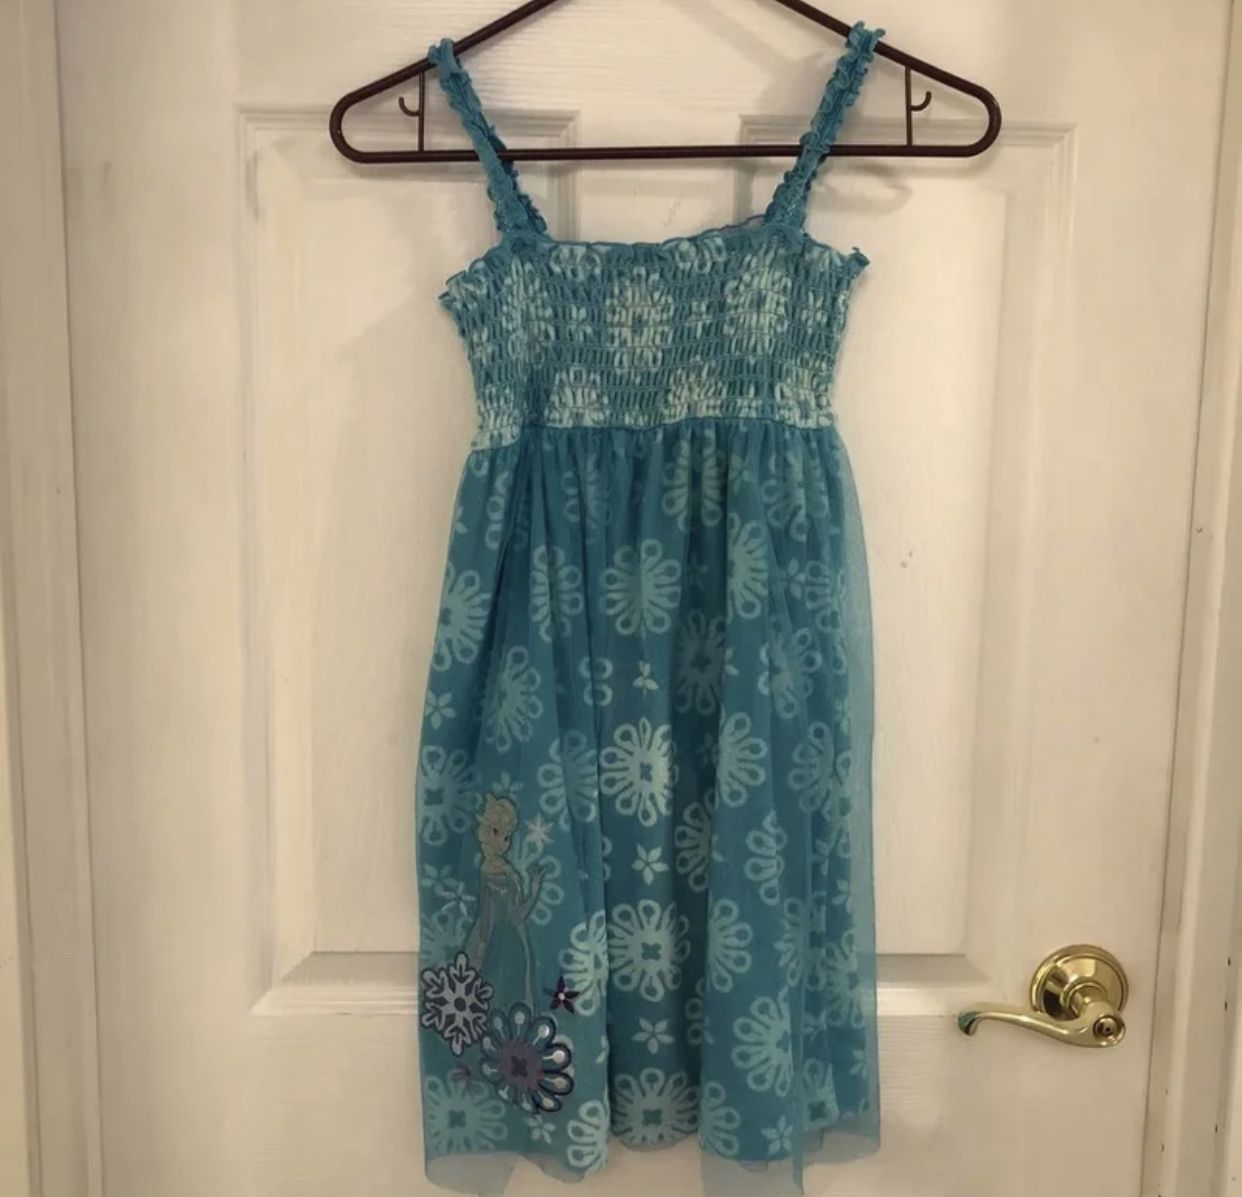 Size M 9/10 youth Frozen Terry cloth tank dress  Runs like a M  Has Elsa on it  Great for a swimsuit cover up  Has some wear but still in good conditi